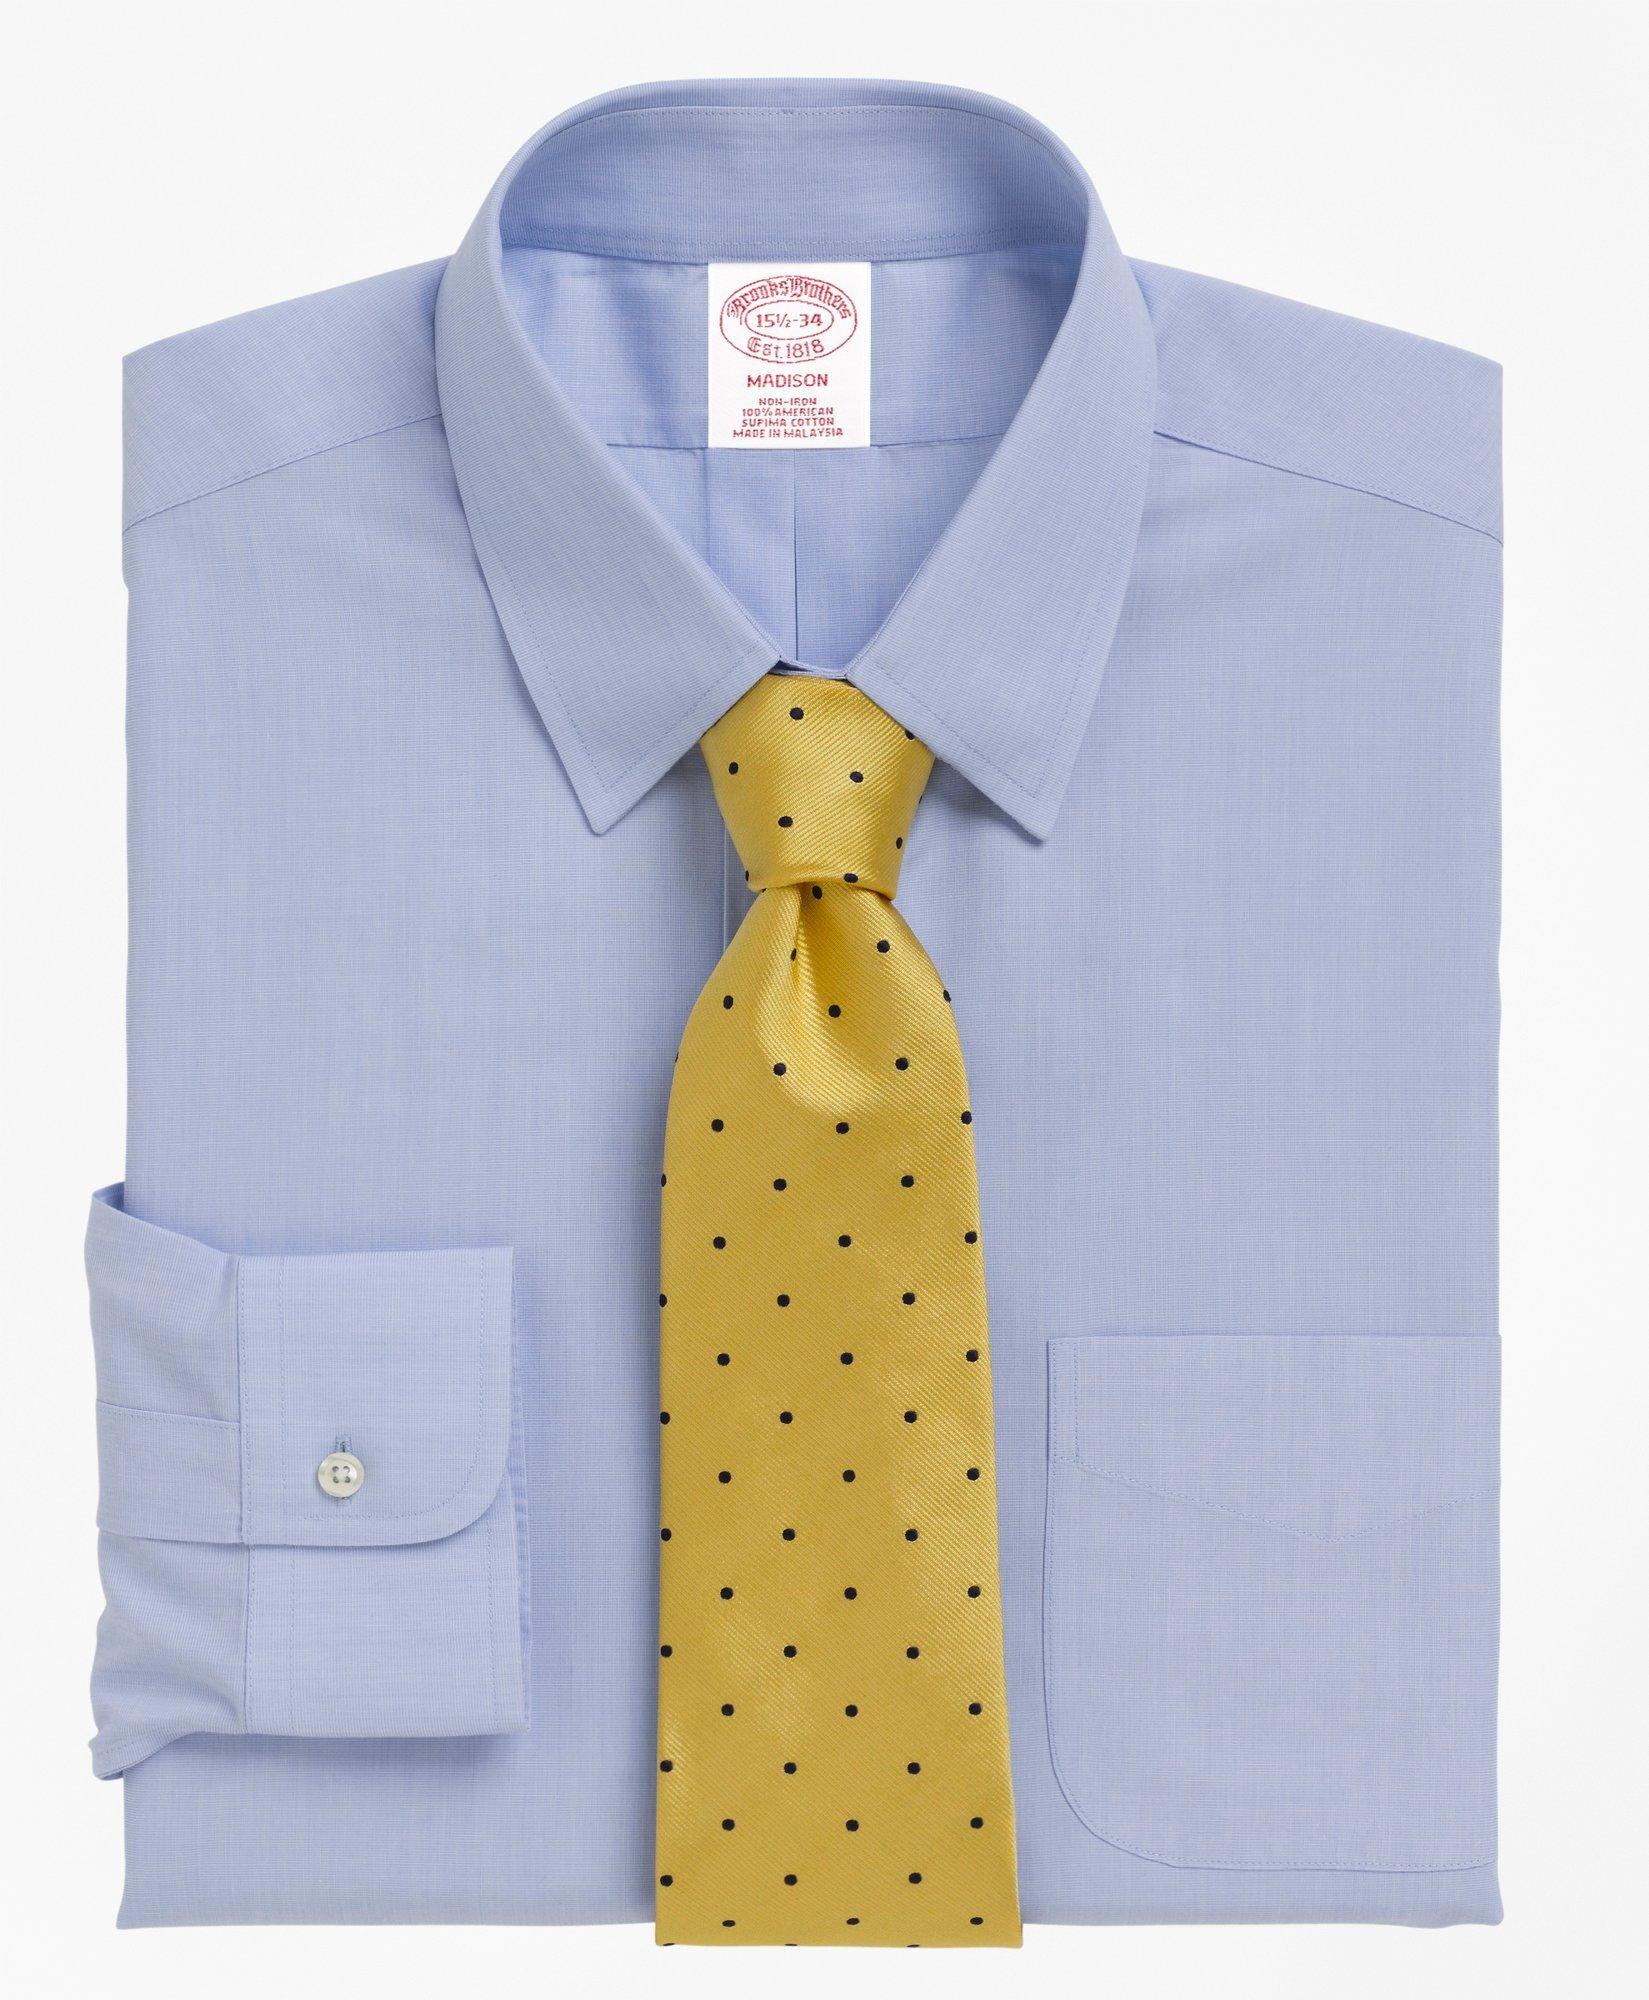 Brooks Brothers Madison Relaxed-fit Dress Shirt, Non-iron Tab Collar | Light Blue | Size 14½ 34